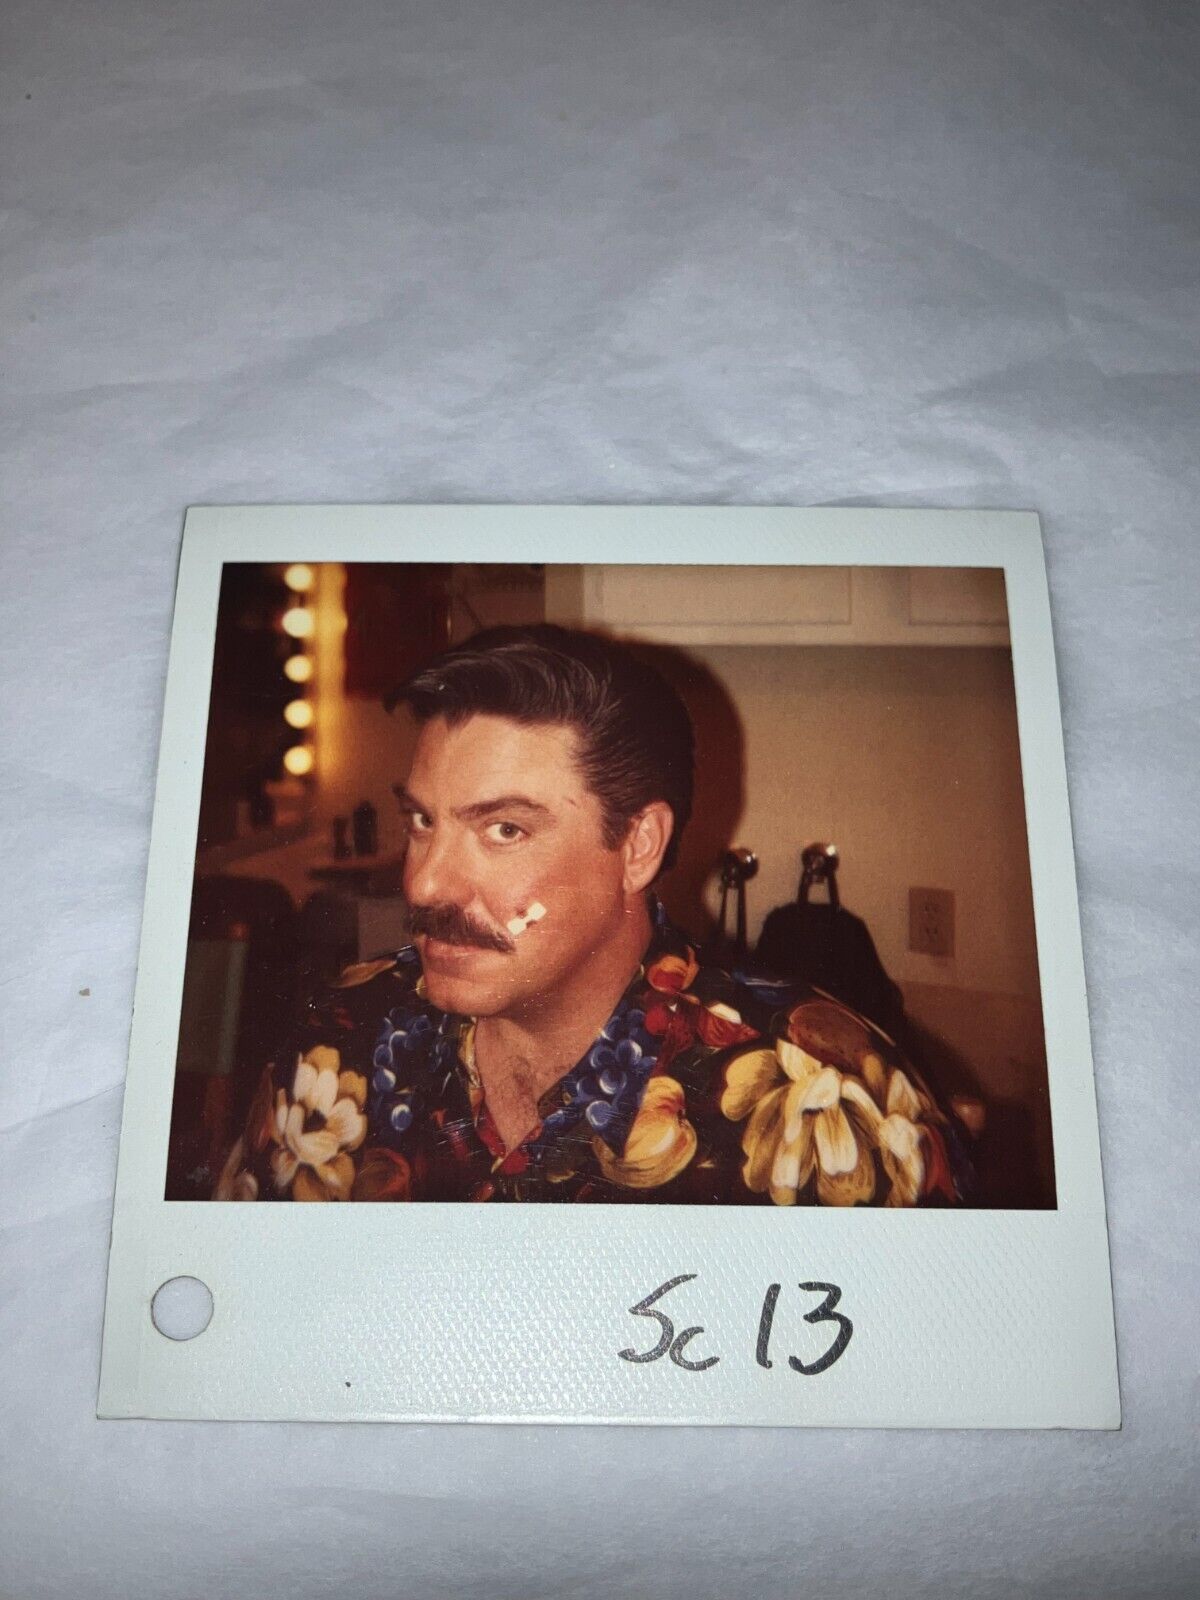 Original Tales from the Crypt HBO Series Set Continuity Polaroid Photograph 103